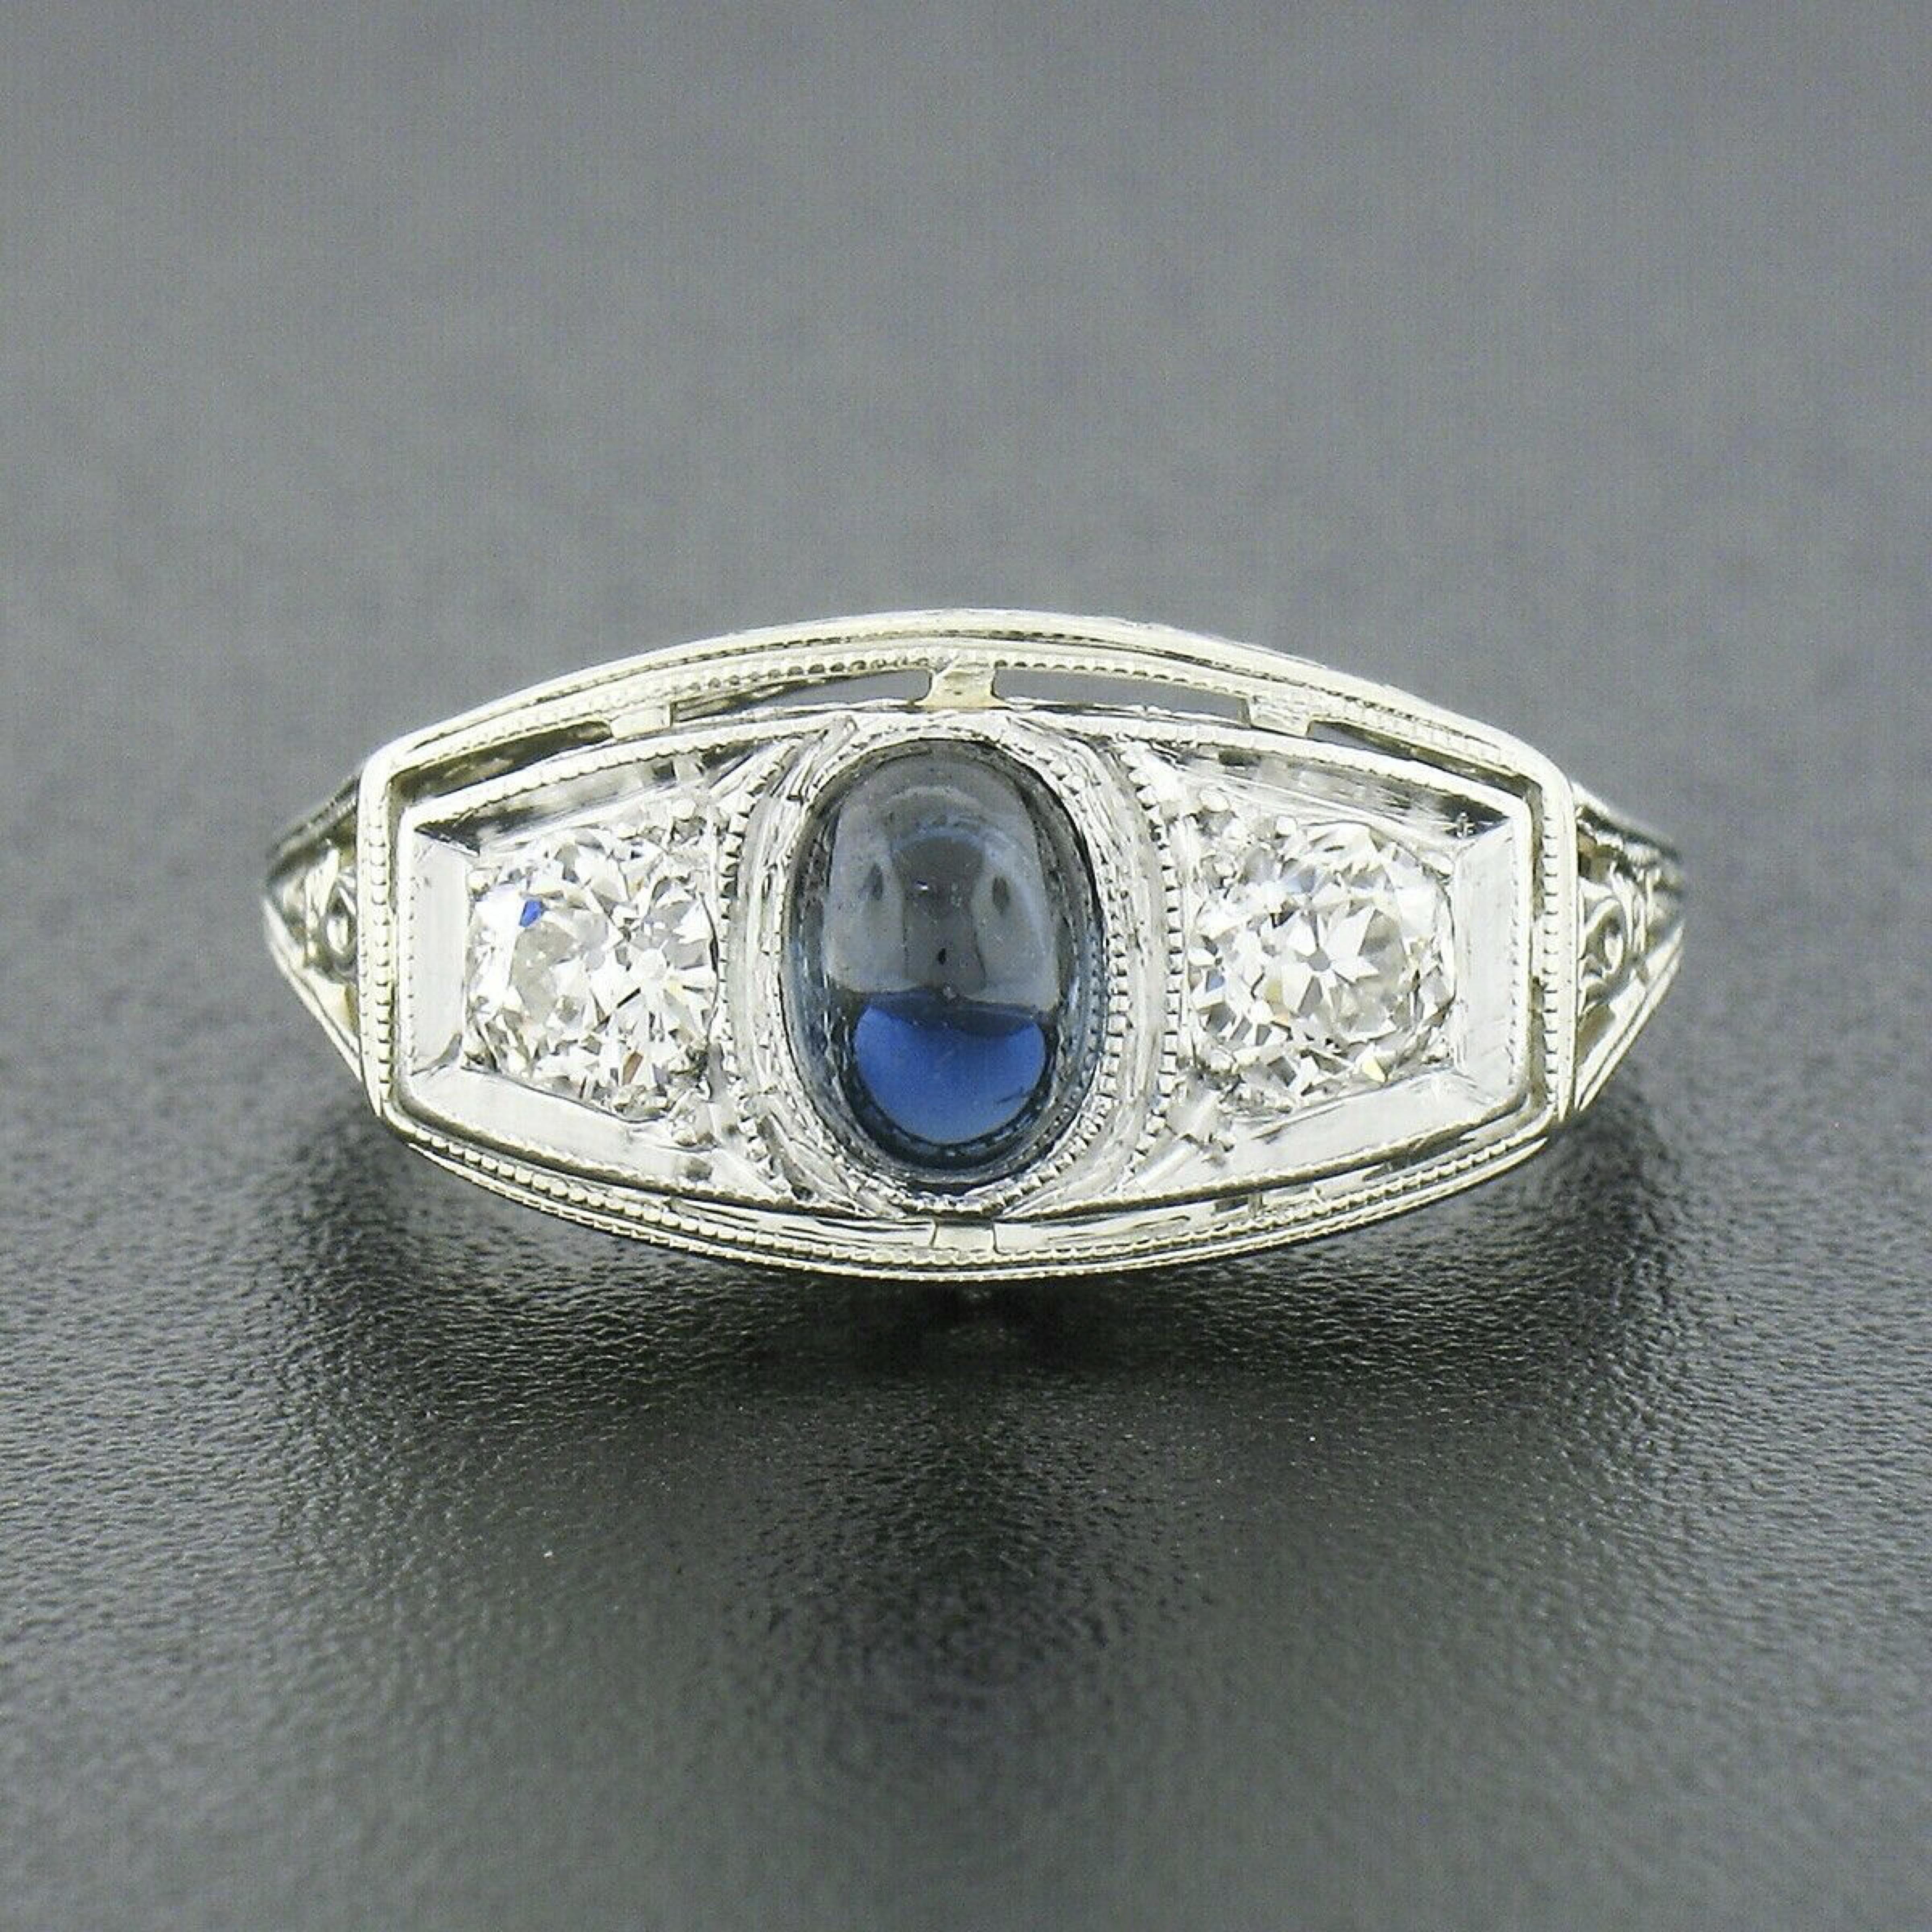 This beautiful antique ring was crafted in solid 18k white gold with a solid platinum top during the art deco period. This three stone style ring features a high oval cabochon cut sapphire neatly bezel set at its center and flanked on both sides